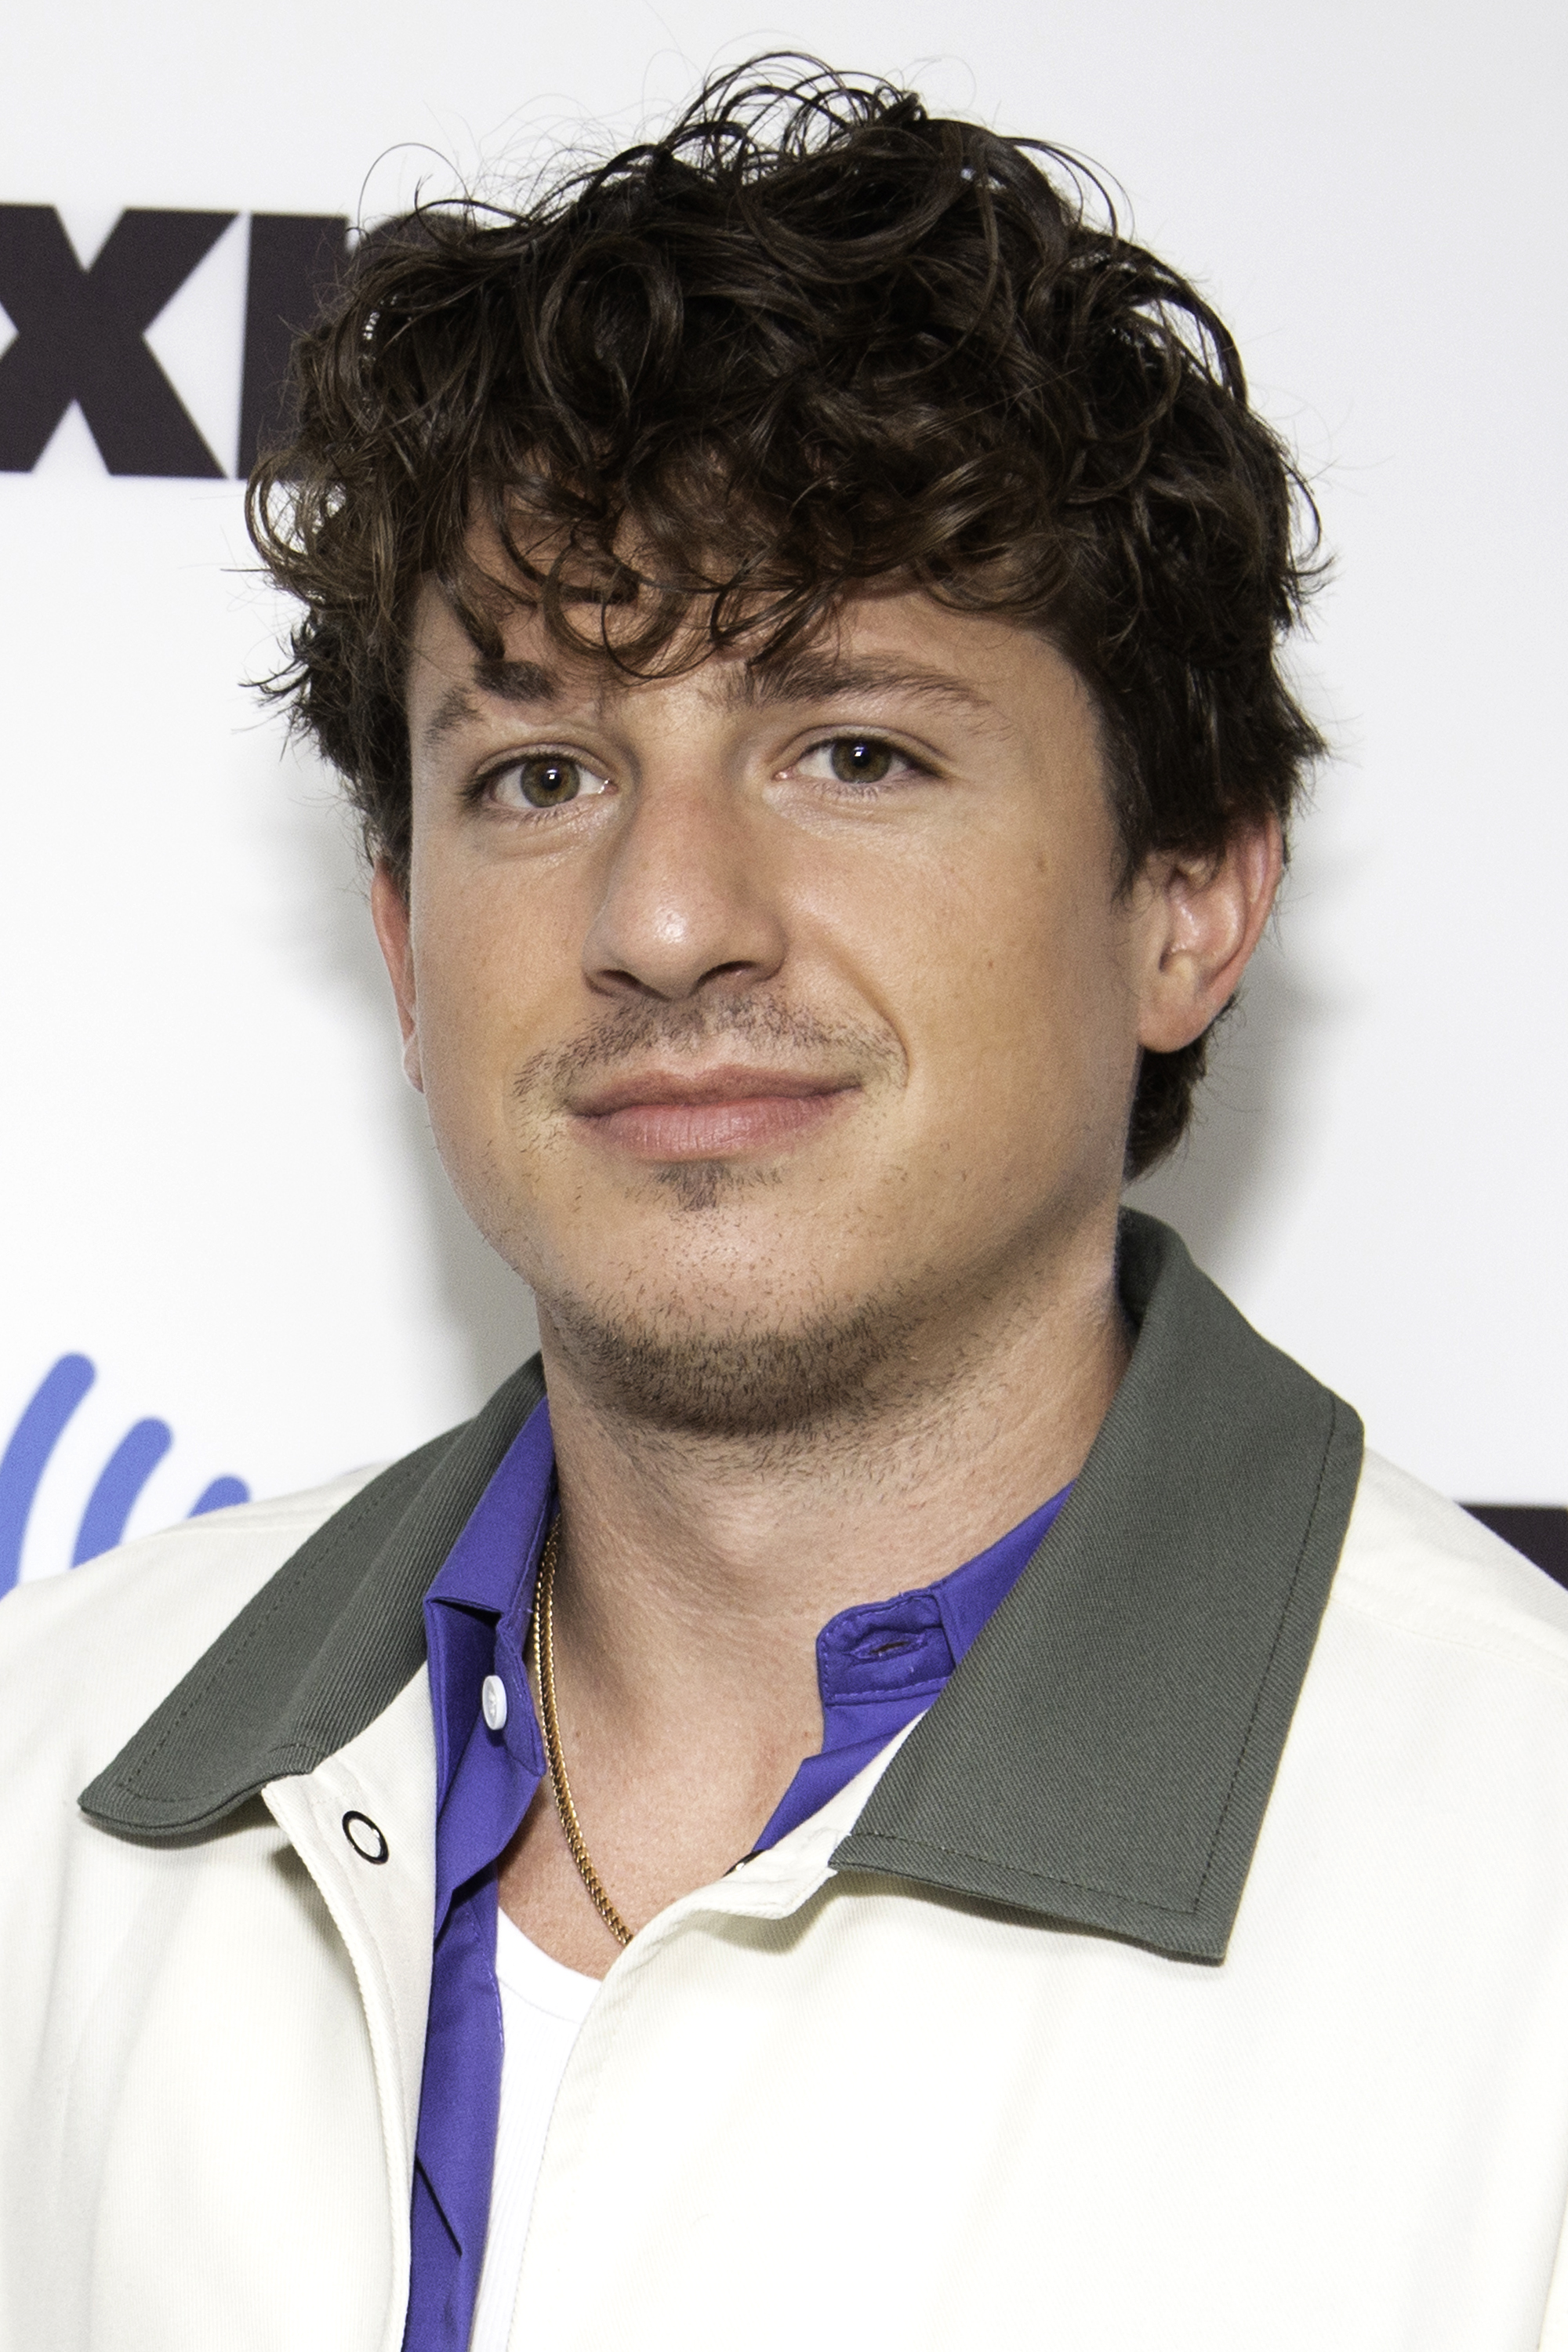 Charlie Puth at SiriusXM Studios on May 3, 2023, in New York City. | Source: Getty Images